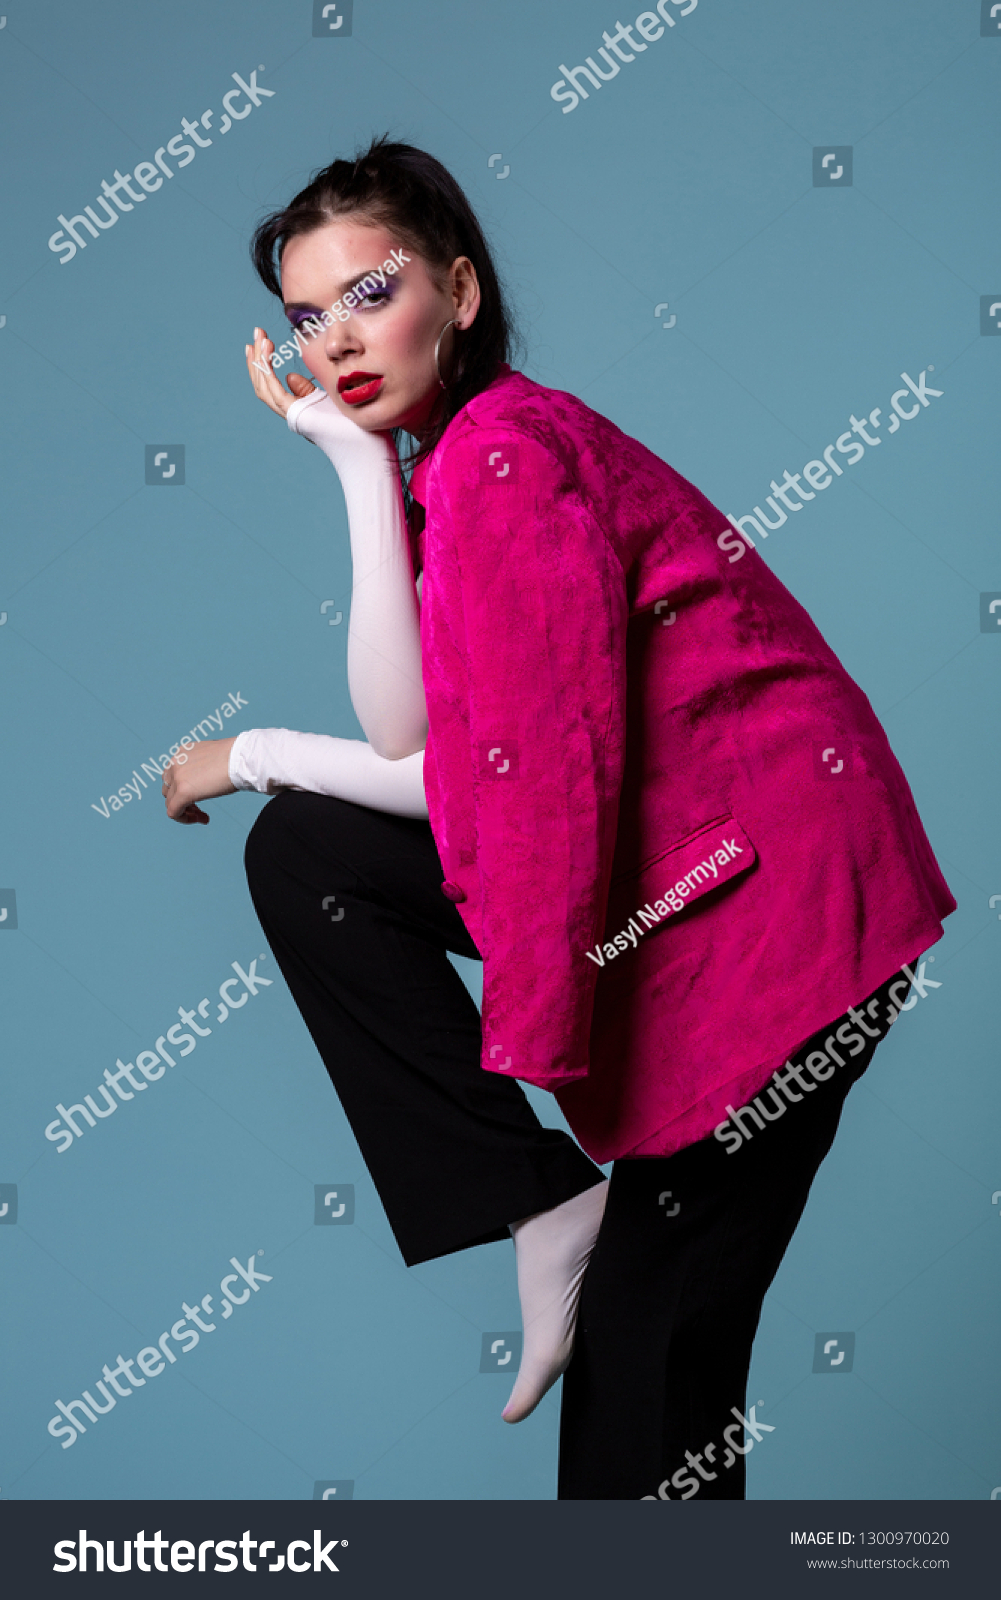 Amazing young brunett woman in trendy pink jacket standing on one leg, looking at the camera posing in the studio on blue background #1300970020